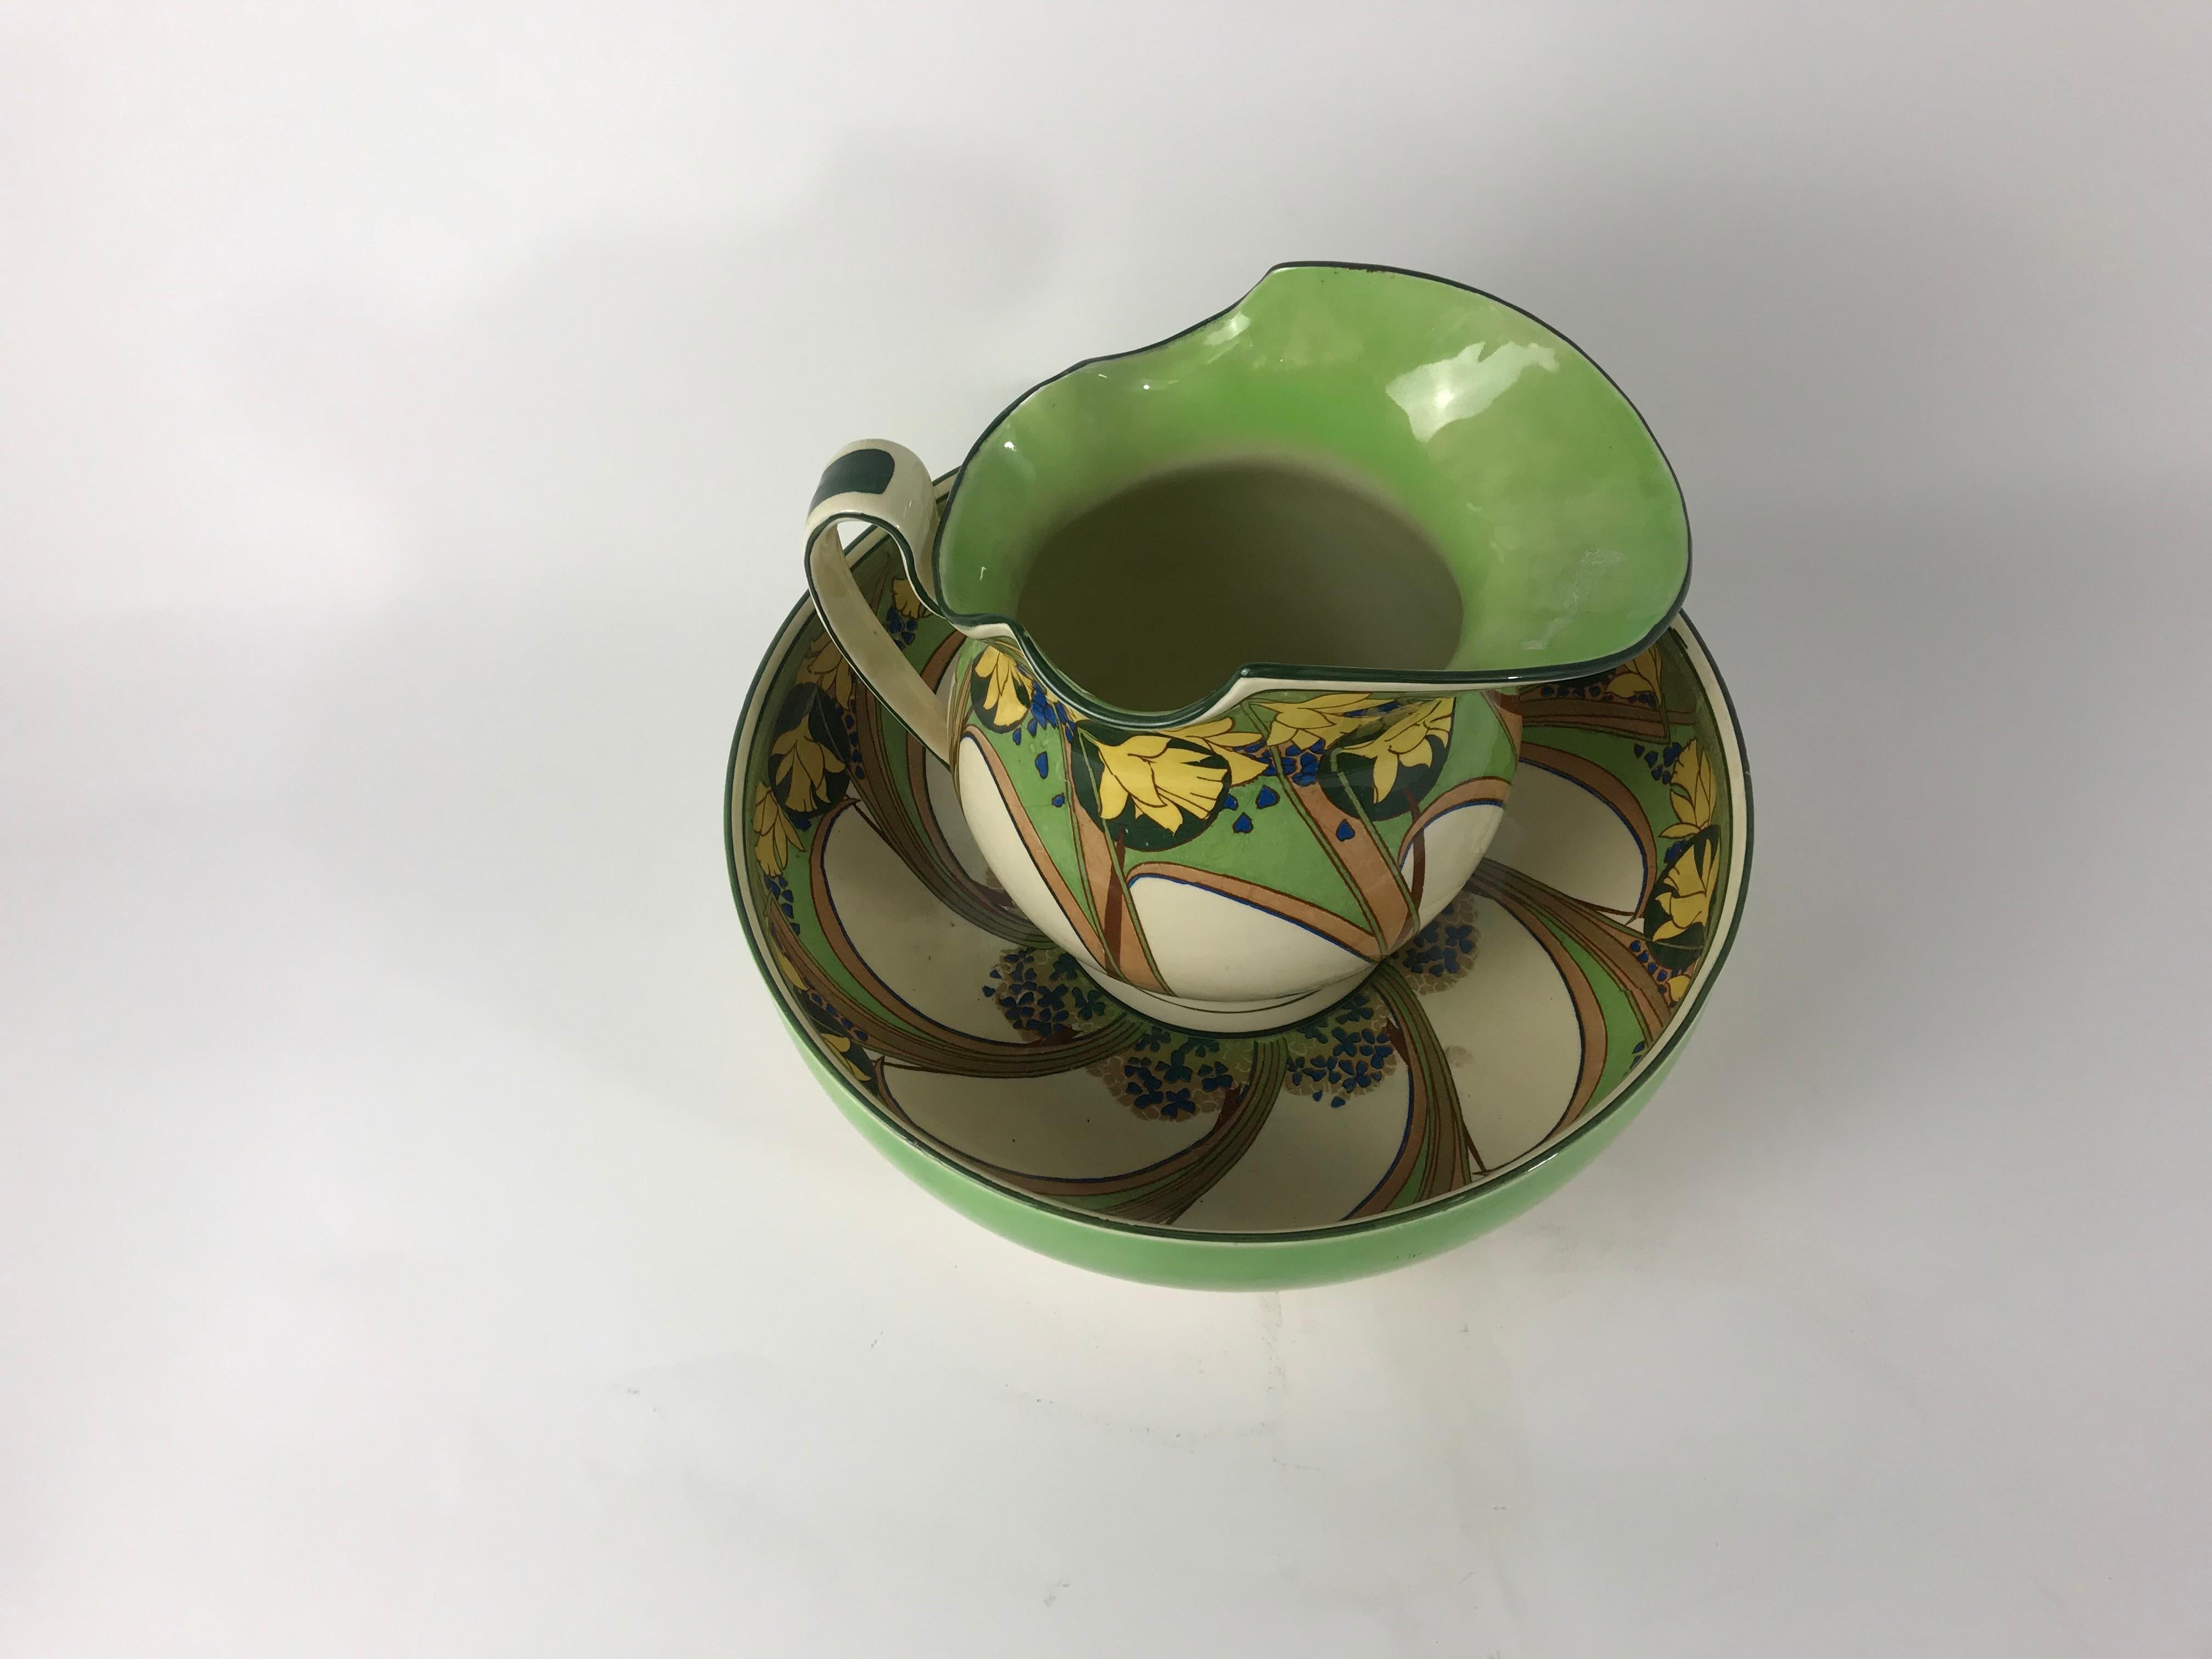 A gorgeous Art Nouveau 2-piece wash set collection by Royal Doulton. Swirling with soft colorful tones of yellow and green and sharp deep blue hues. This set is a match made in heaven with the simplicity of the deep, wide green bowl clashing